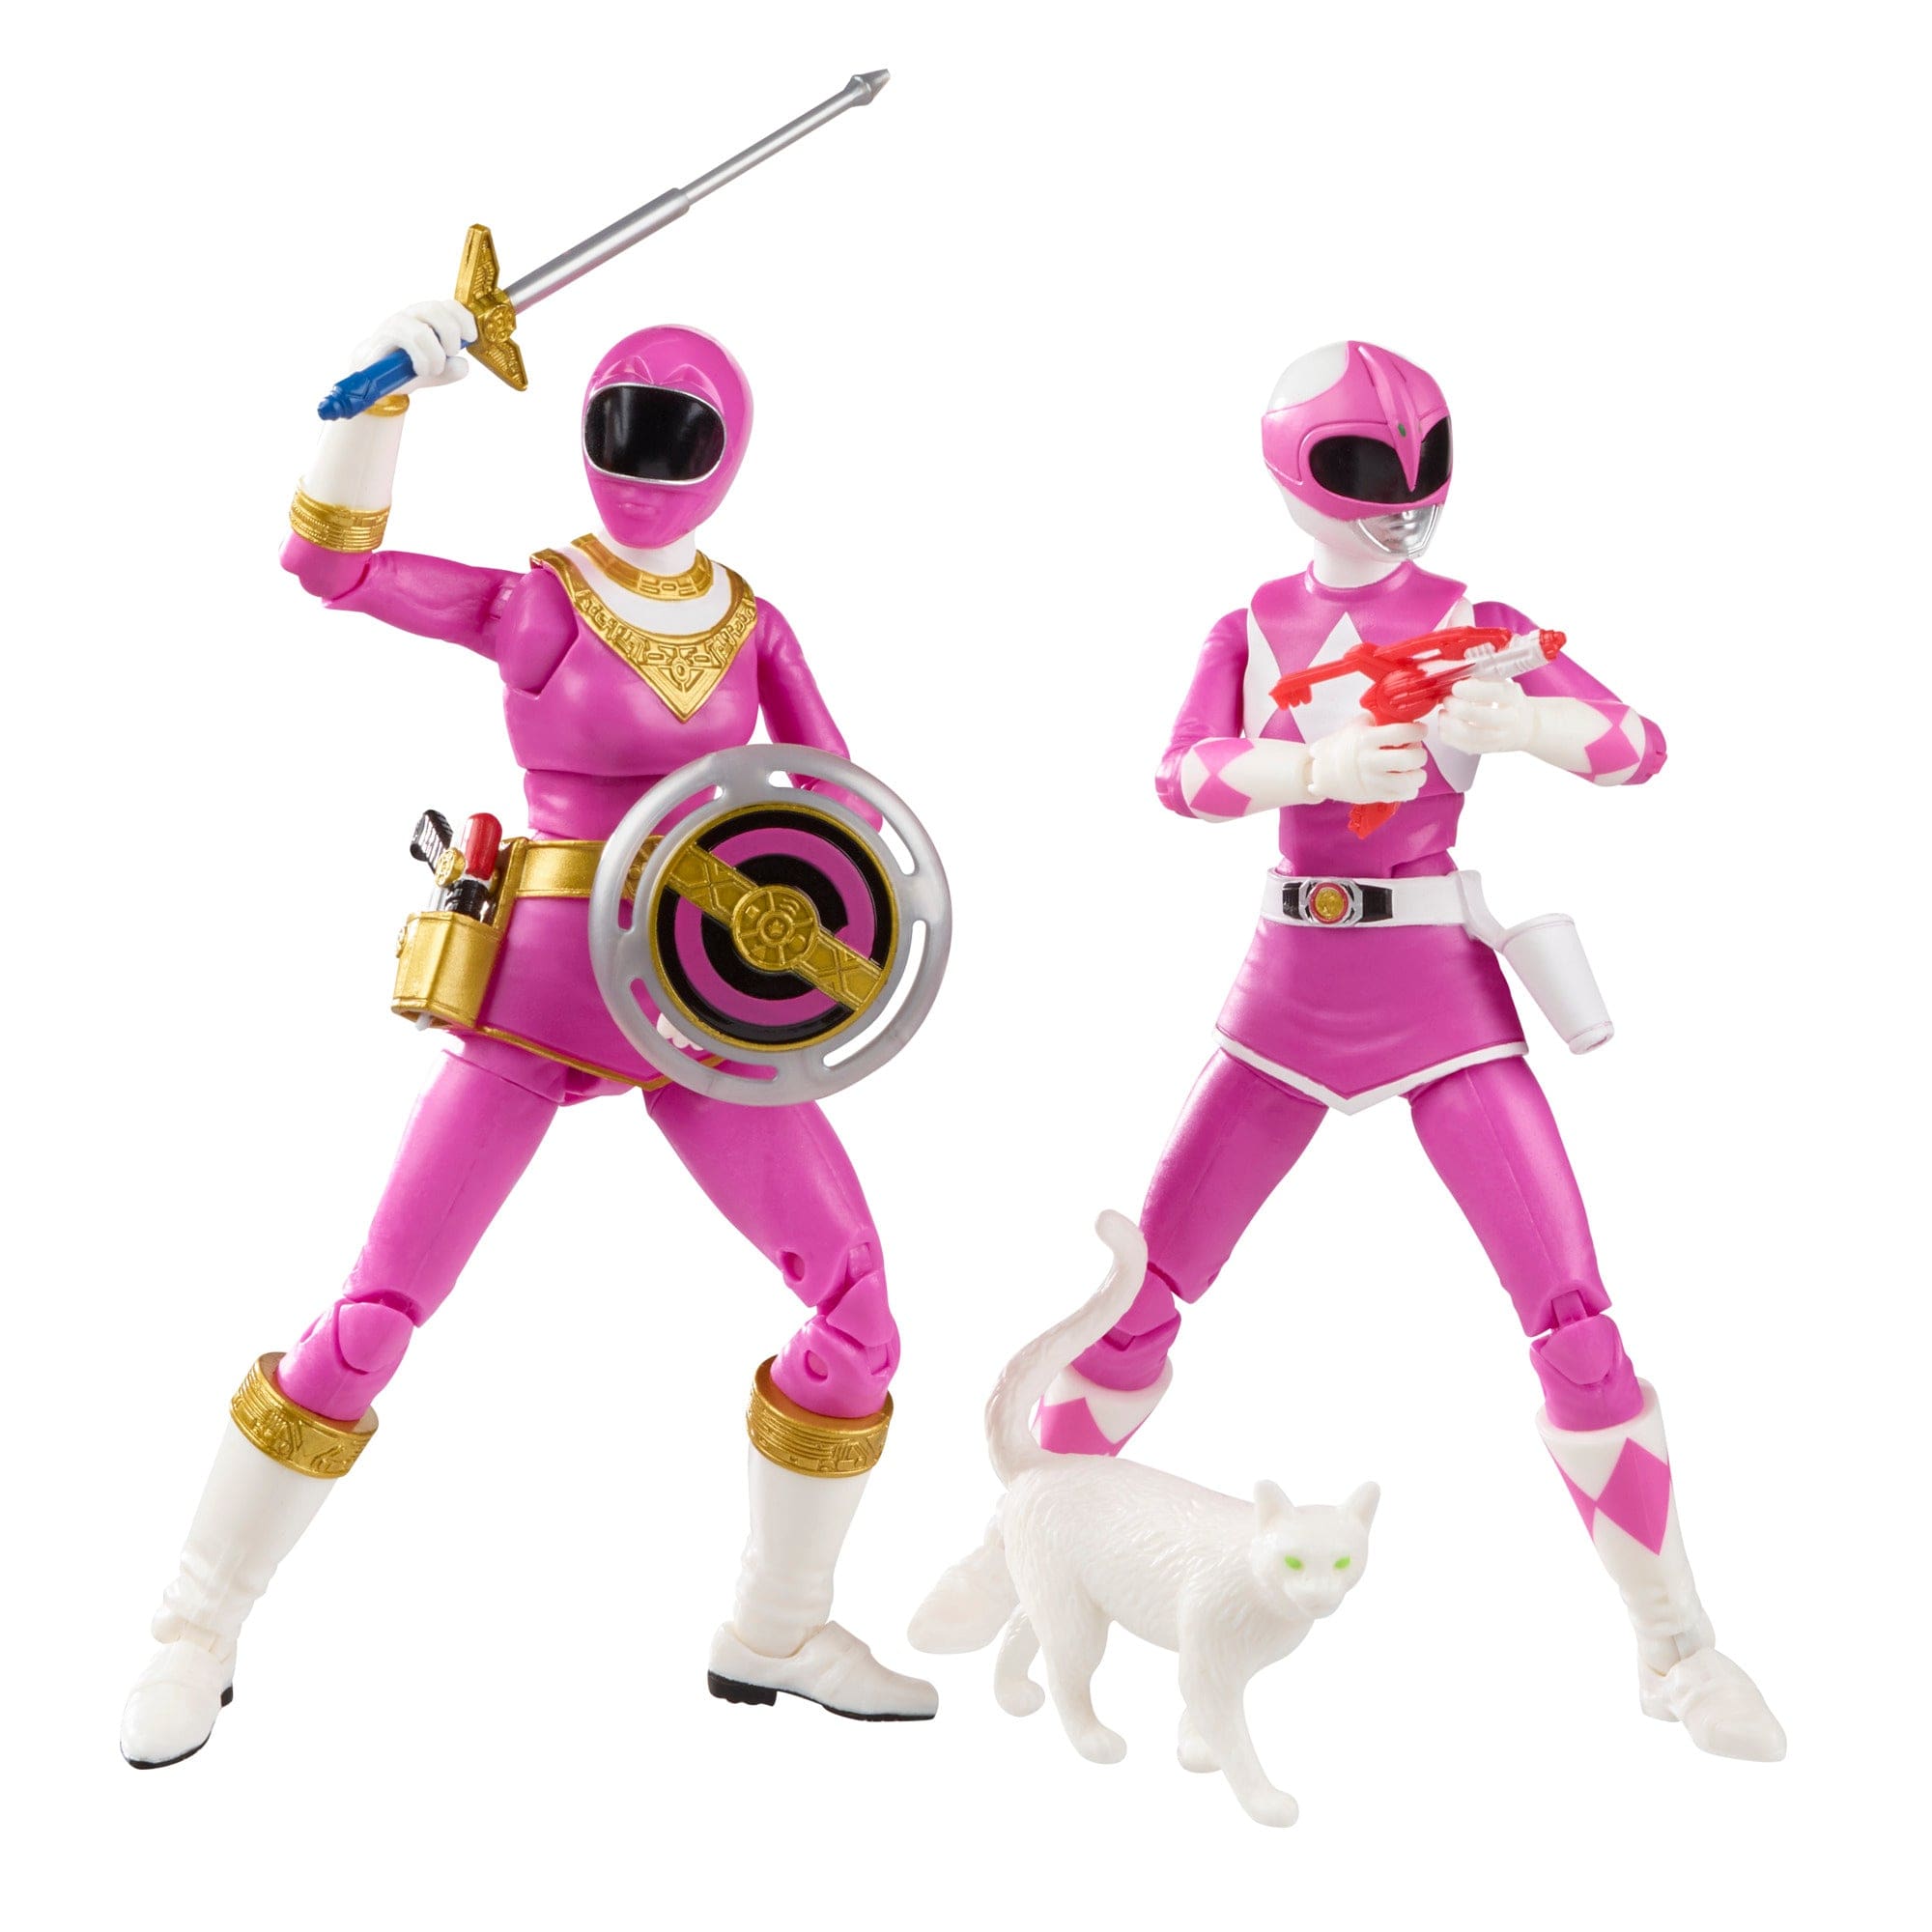 Power Rangers WILD FORCE PINK Action Figure Toy